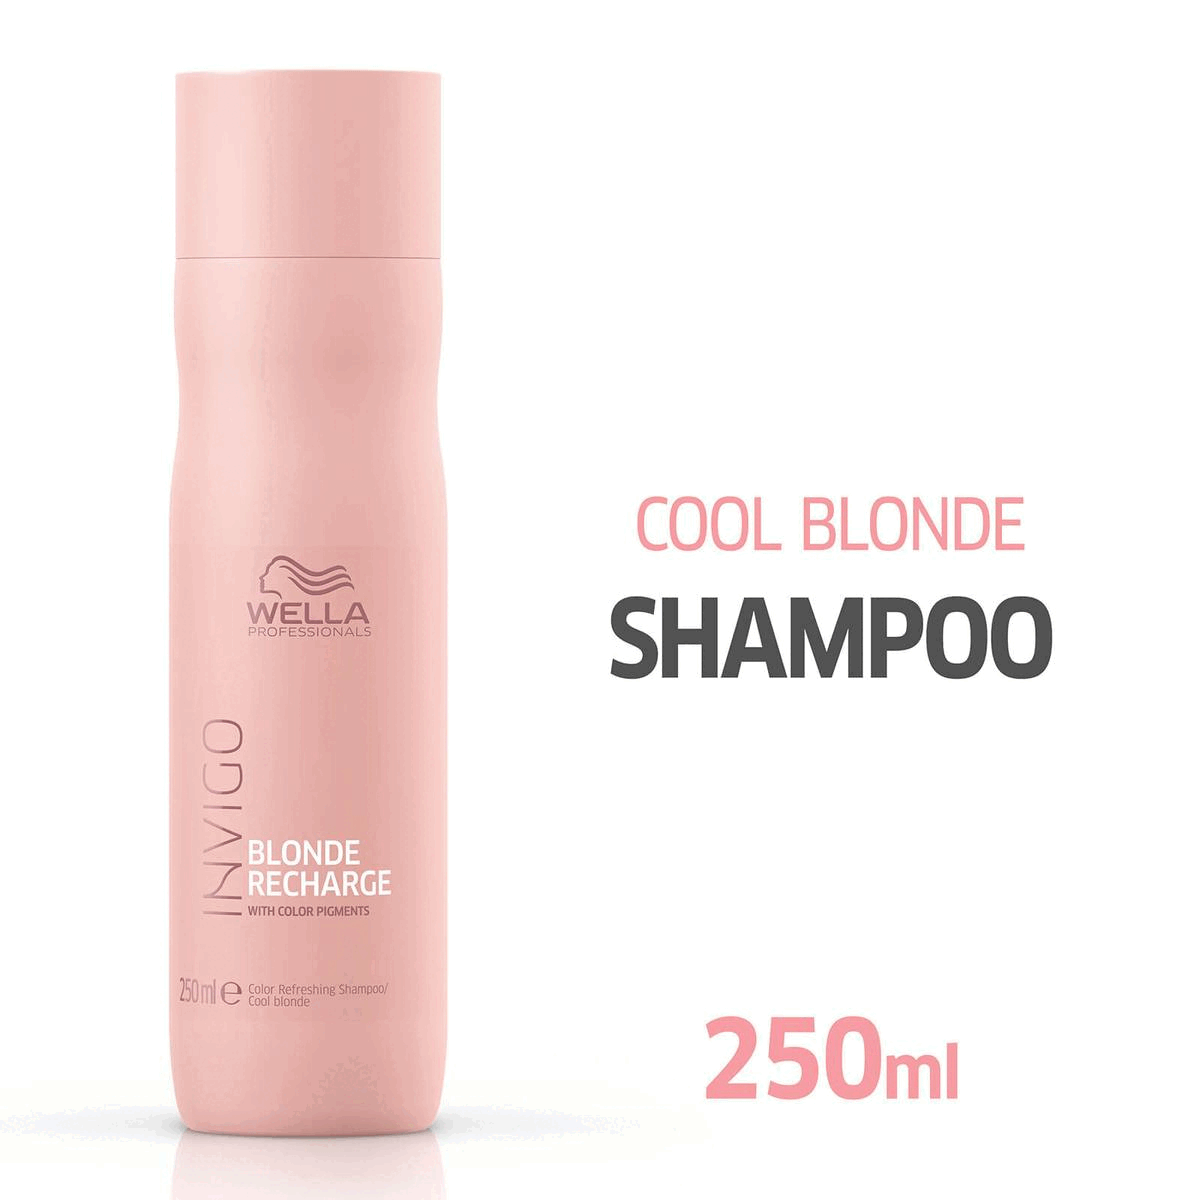 Image 1- Cool Blonde Shampoo,250ml. Image 2- Helps to fight brass. Image 3-With blonde recharge-blend. Image 4-WHelps to fight brass. Image 5-For blonde brightness and vibrancy. Image 6-Quick, personalised & enjoyable care treatment,10 mins BOOST Fast, efficient, enjoyable,15 mins RECHARGE deep, invigorating, intense,20 mins RECOVER Repair, advanced, Transformative.Image 7-Orris scent. Image 8-Apply to wet hair and lather. Leave for 3-5 minss